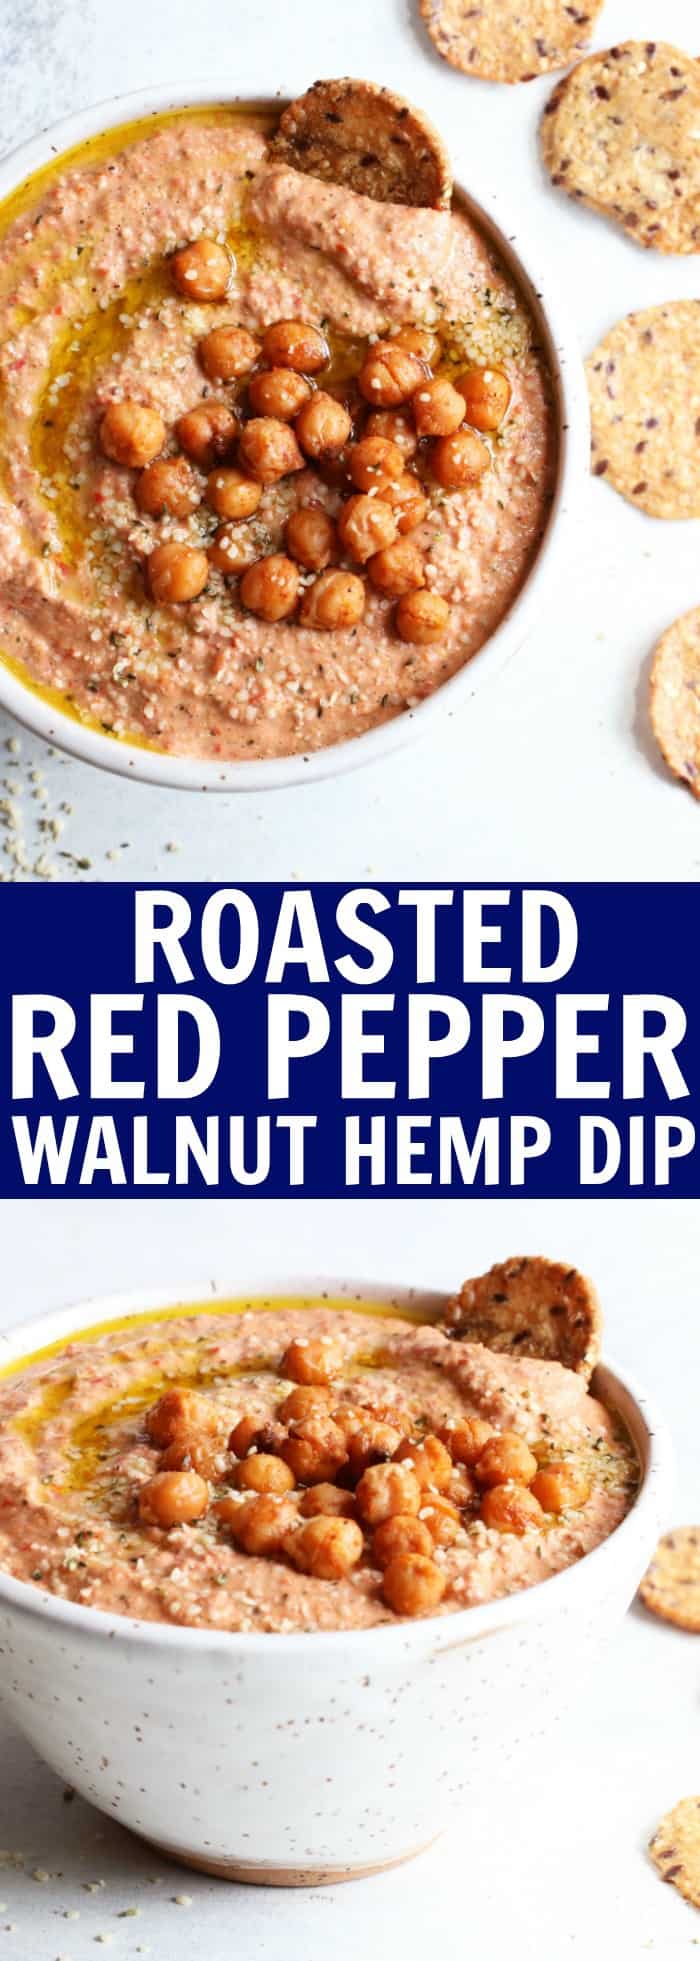 This Roasted Red Pepper Walnut Hemp Dip is the perfect appetizer for your next brunch or gathering! It's nutty, creamy, and delicious served hot or cold! thetoastedpinenut.com #appetizer #dip #vegetarian #glutenfree #roasted #redpepper #walnut #hemp #feta #thetoastedpinenut